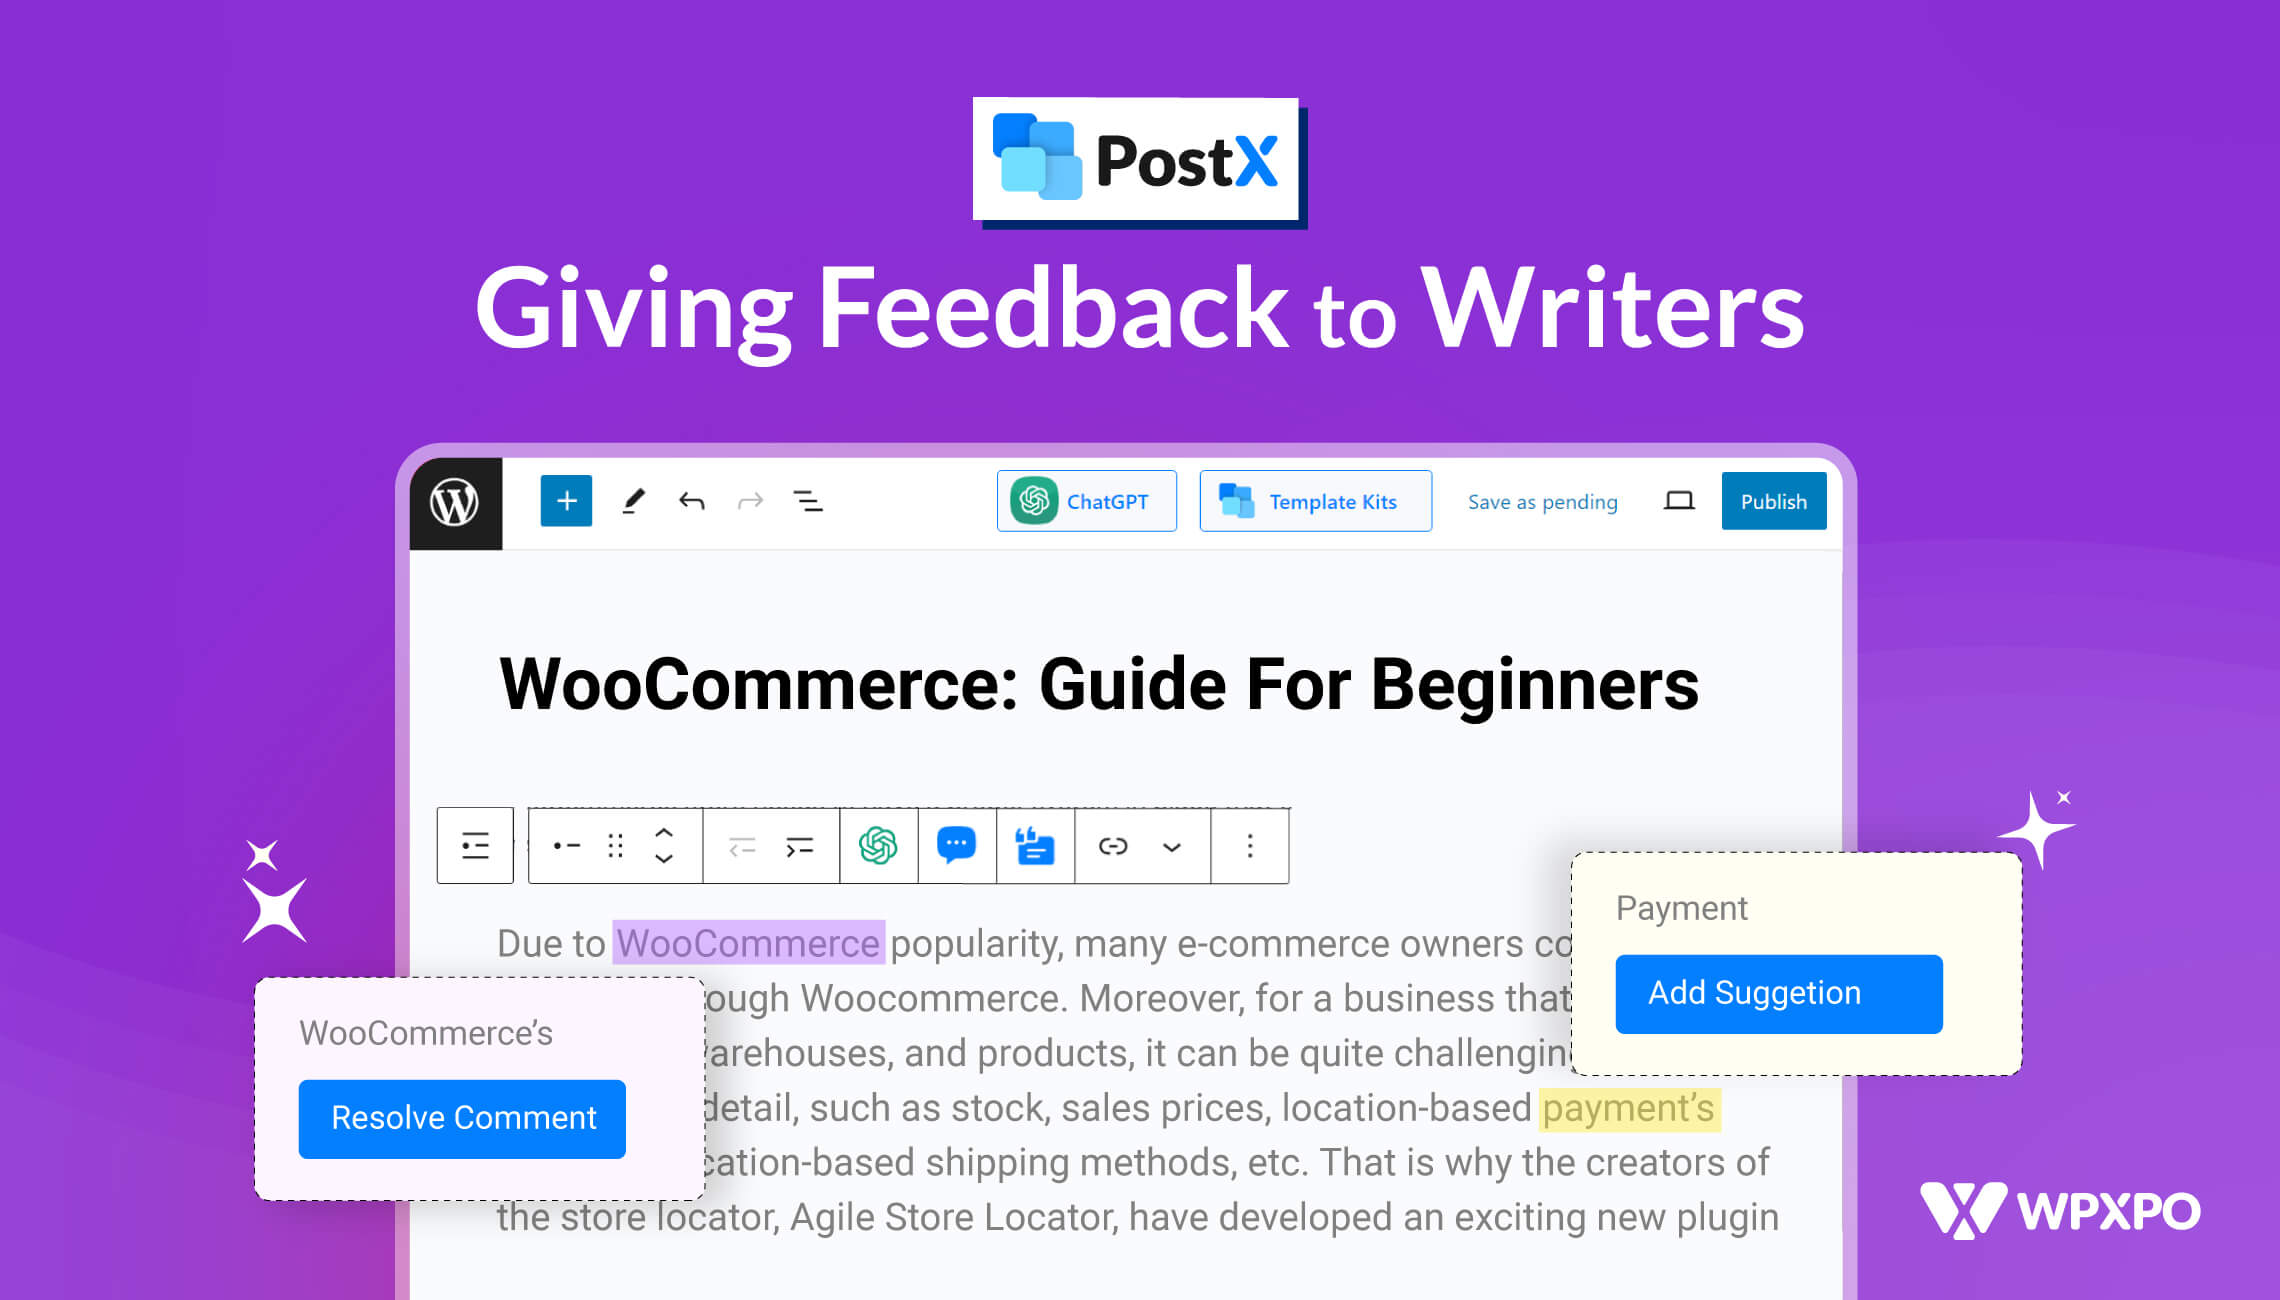 How to Give Feedback on Writing from WordPress?